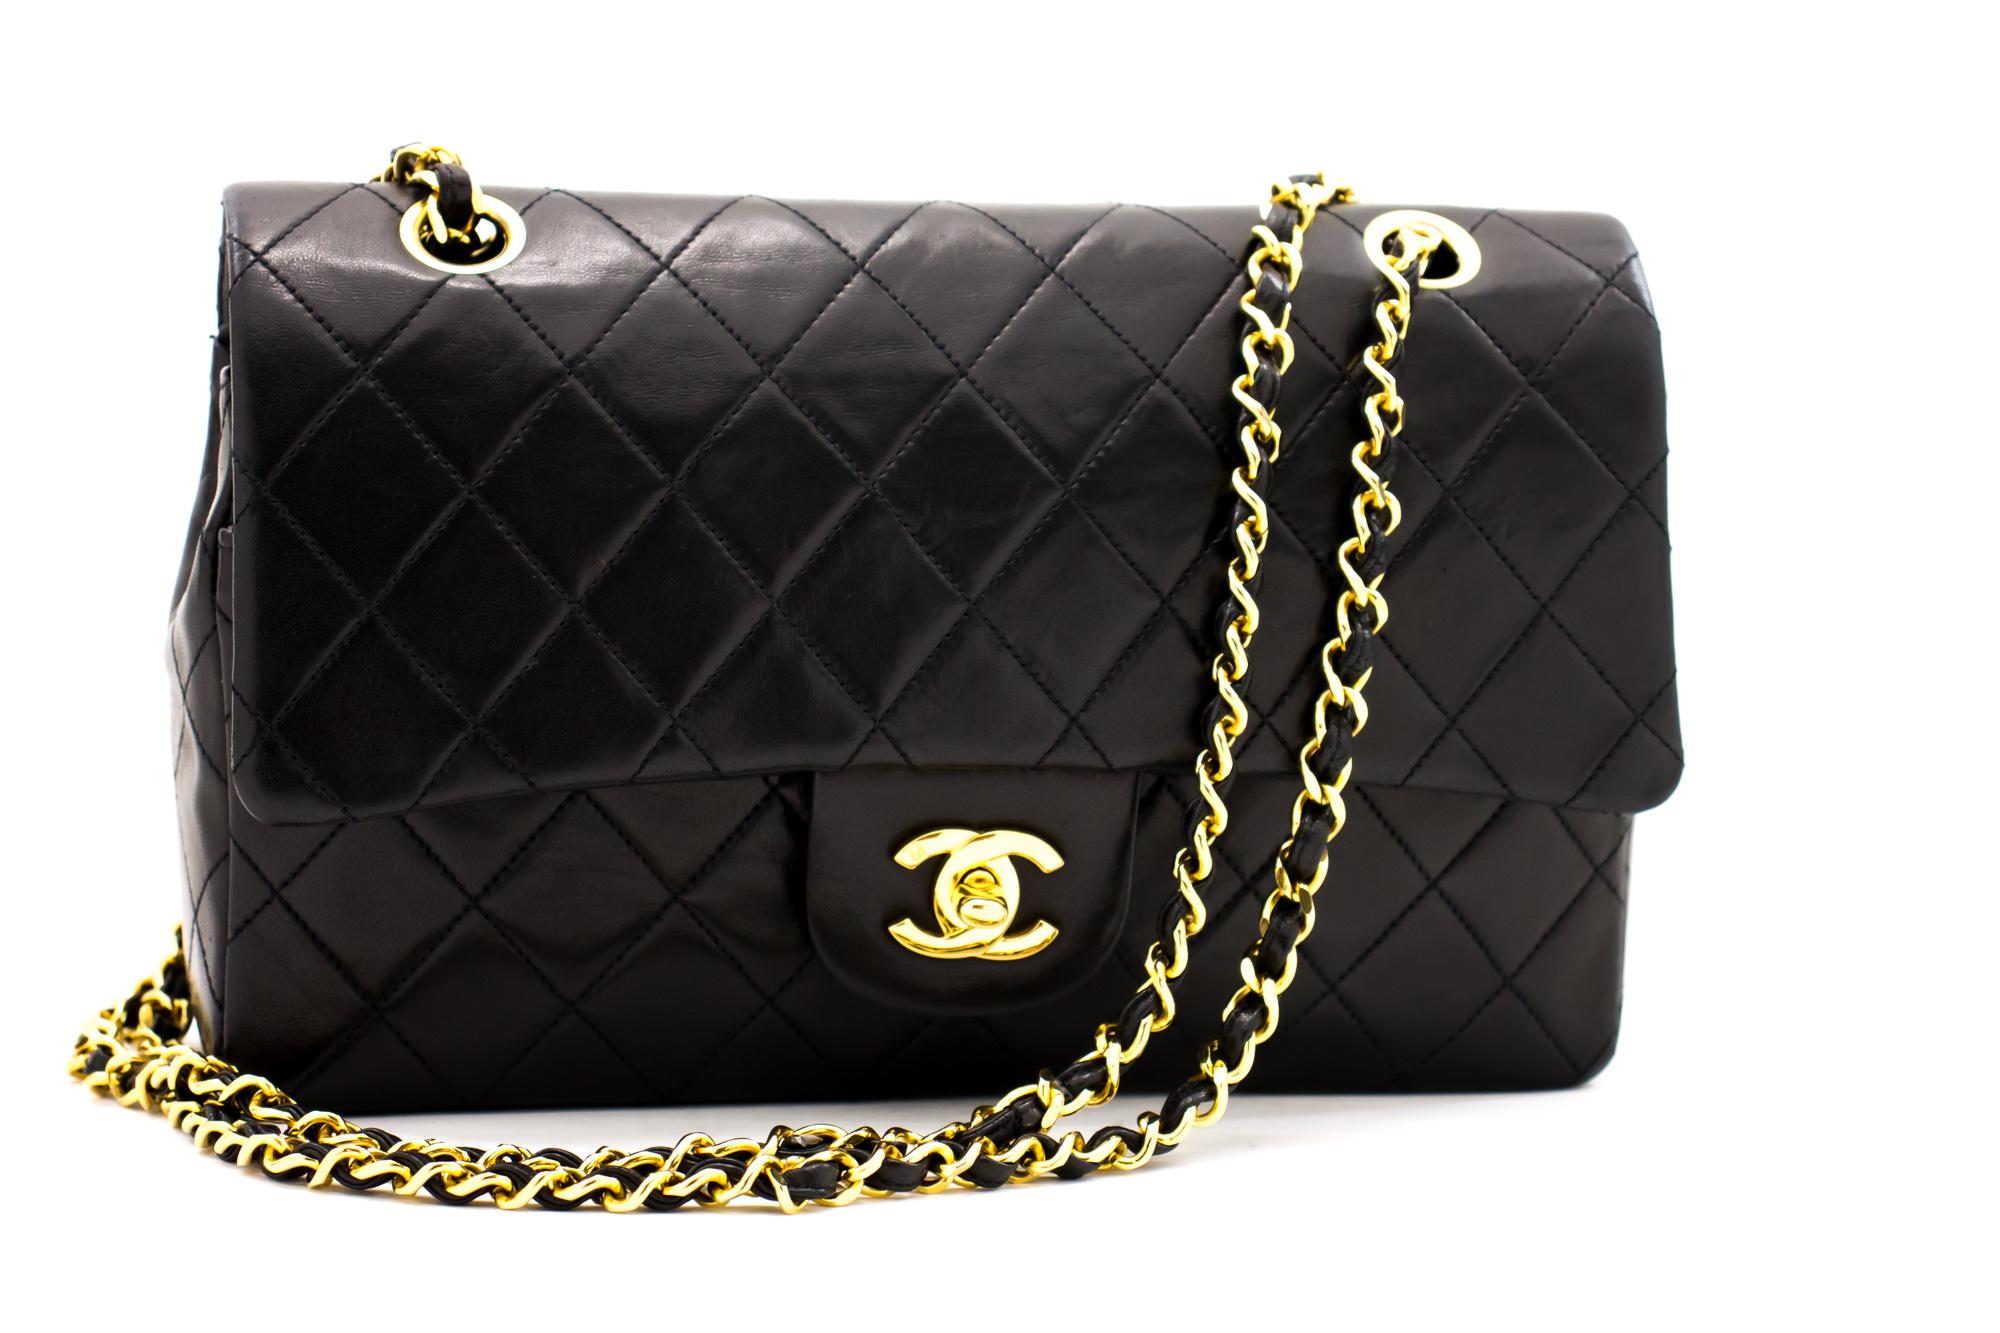 An authentic CHANEL 2.55 Classic Double Flap 10